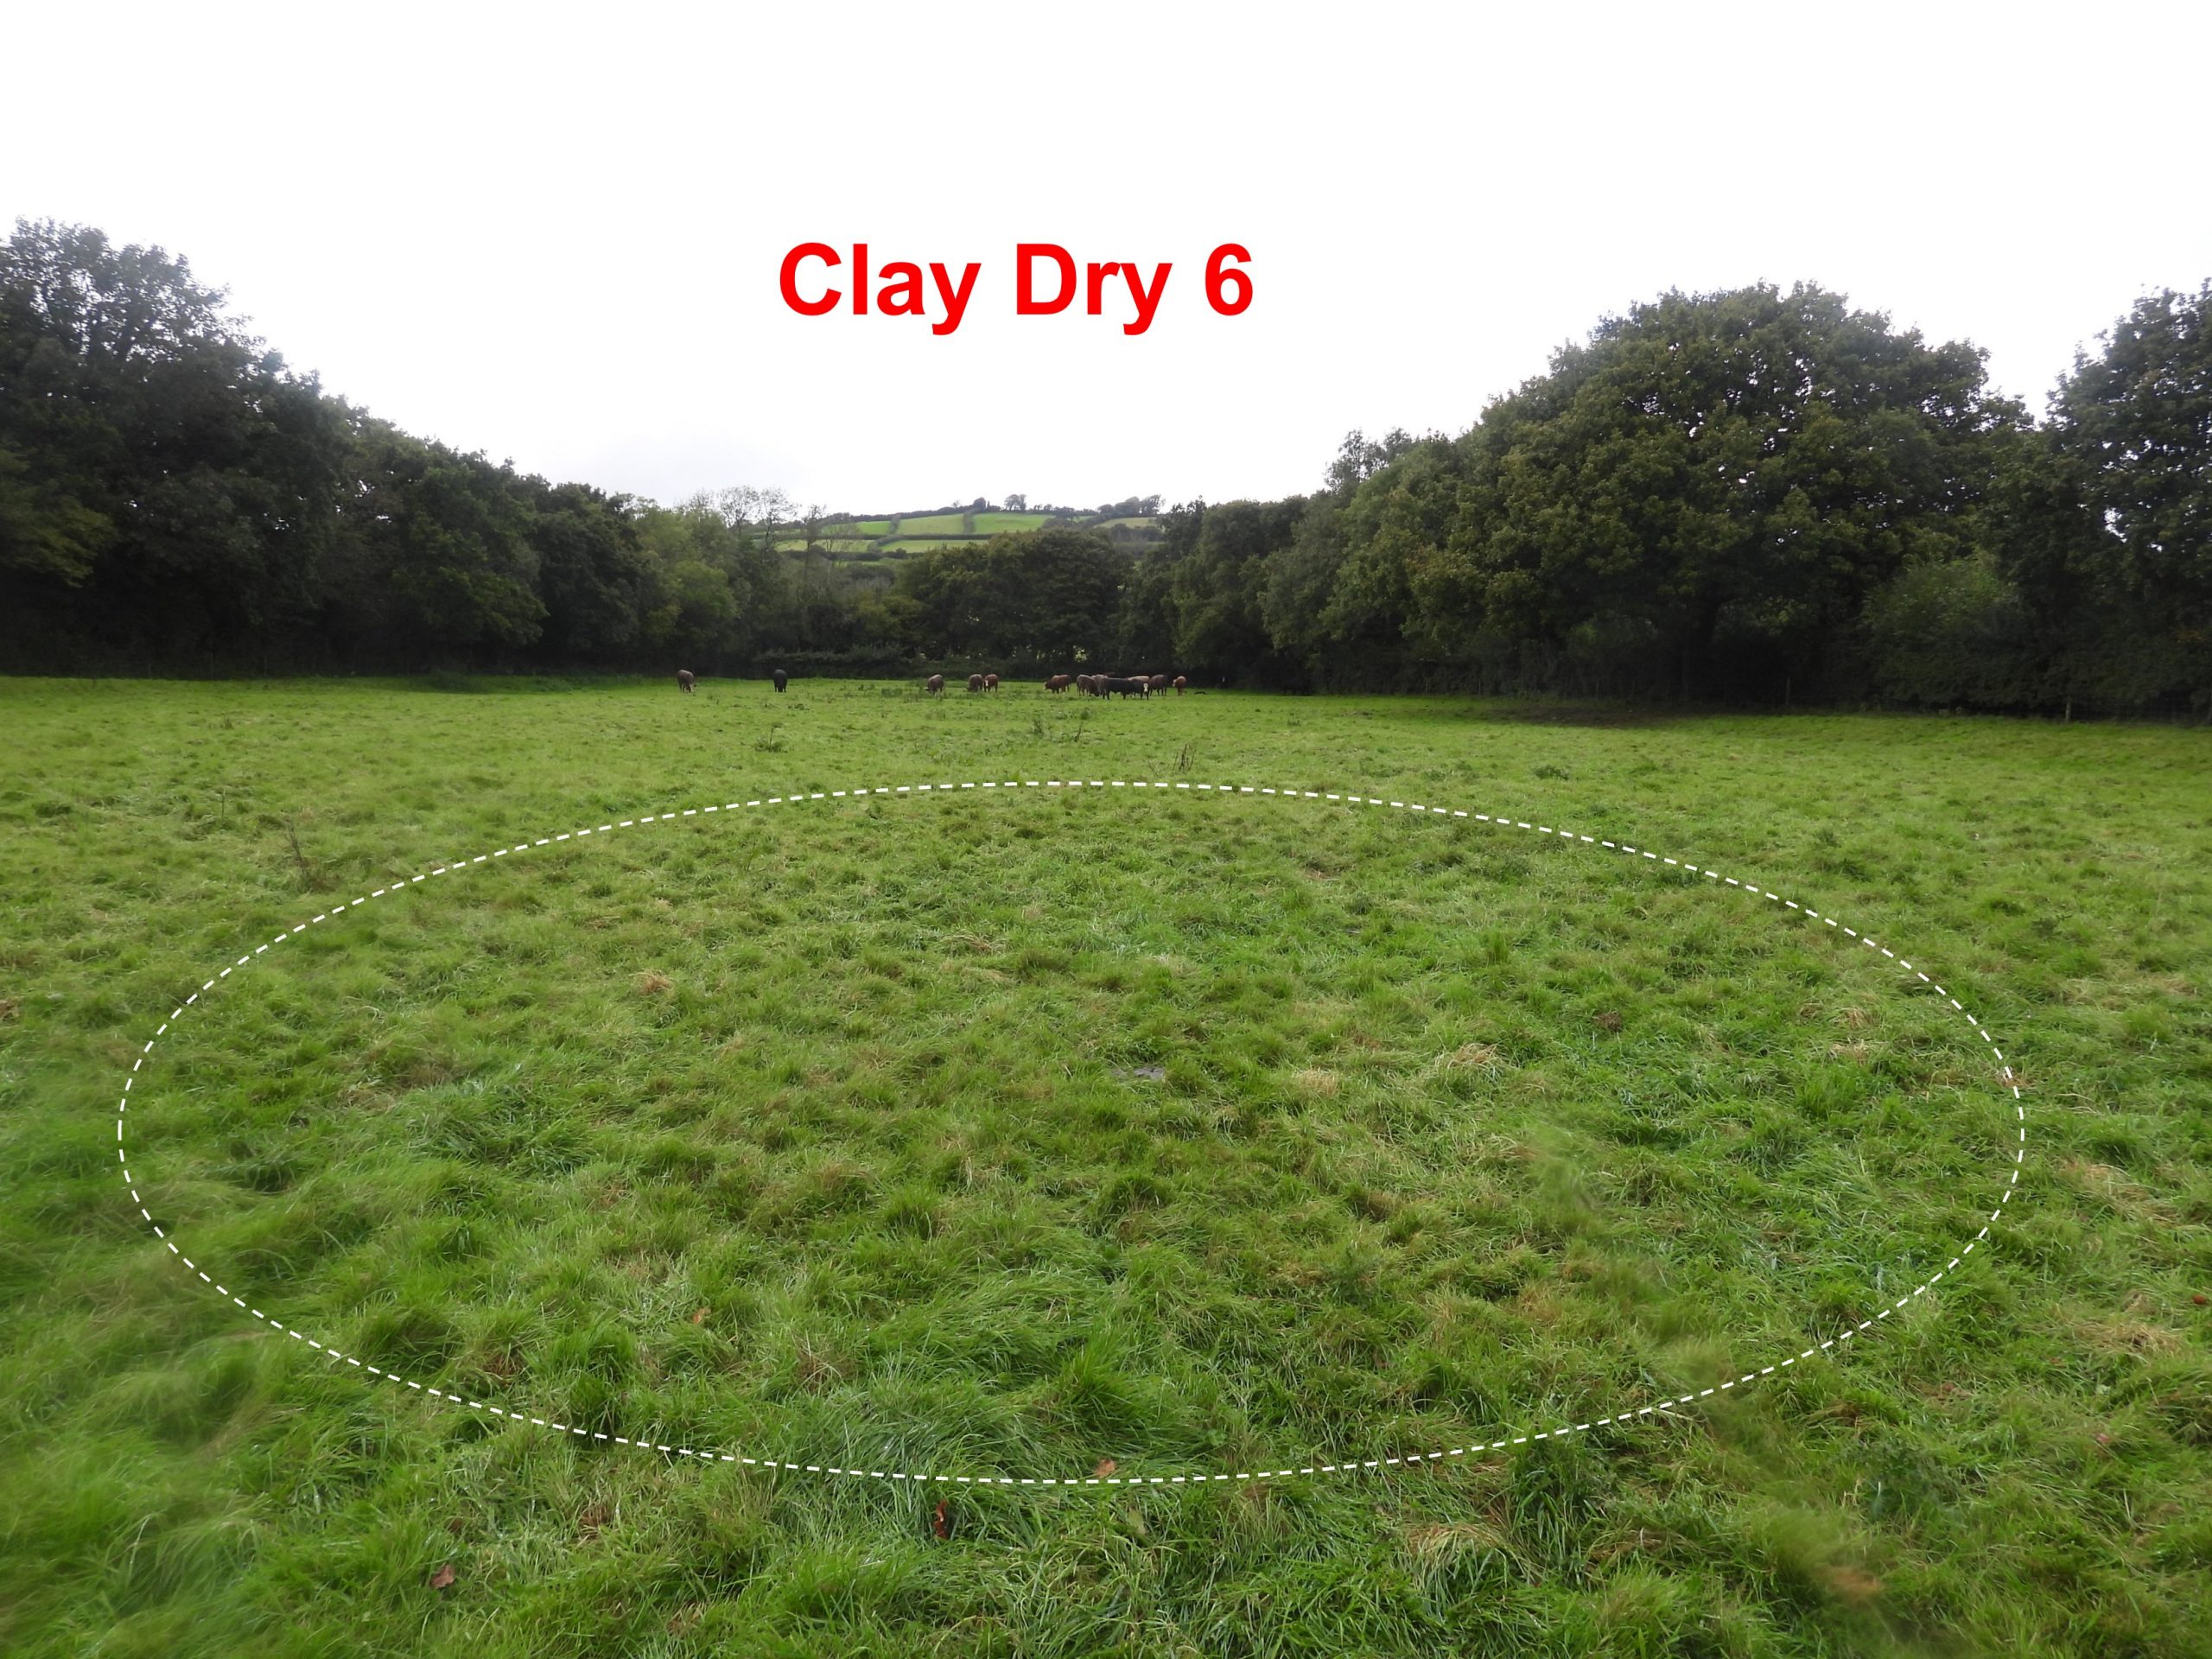 7. Clay Dry 6